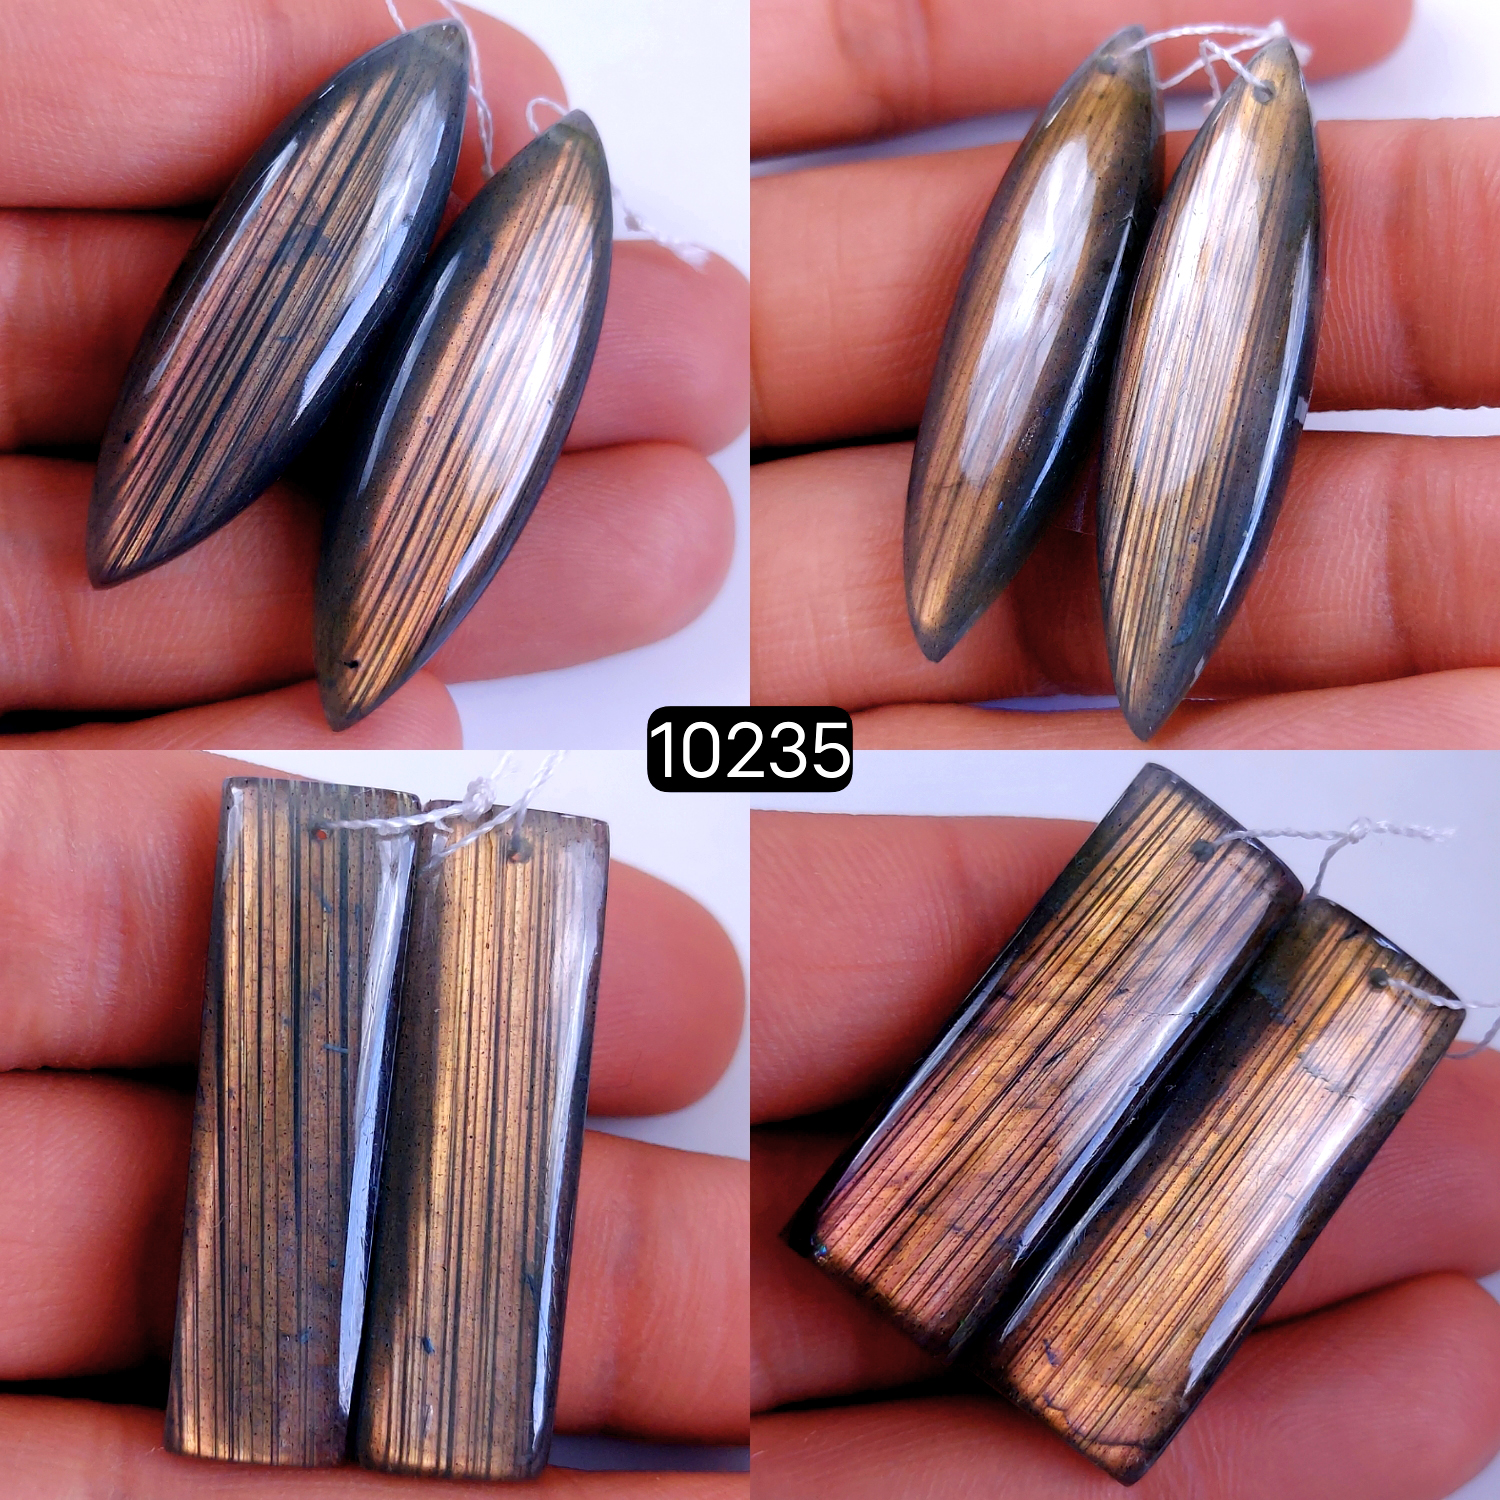 4Pair 199Cts Natural Labradorite Crystal Drill Dangle Drop Earring Pairs Silver Earrings Blue Labradorite Hoop Jewelry  43x13 35x12mm #10235